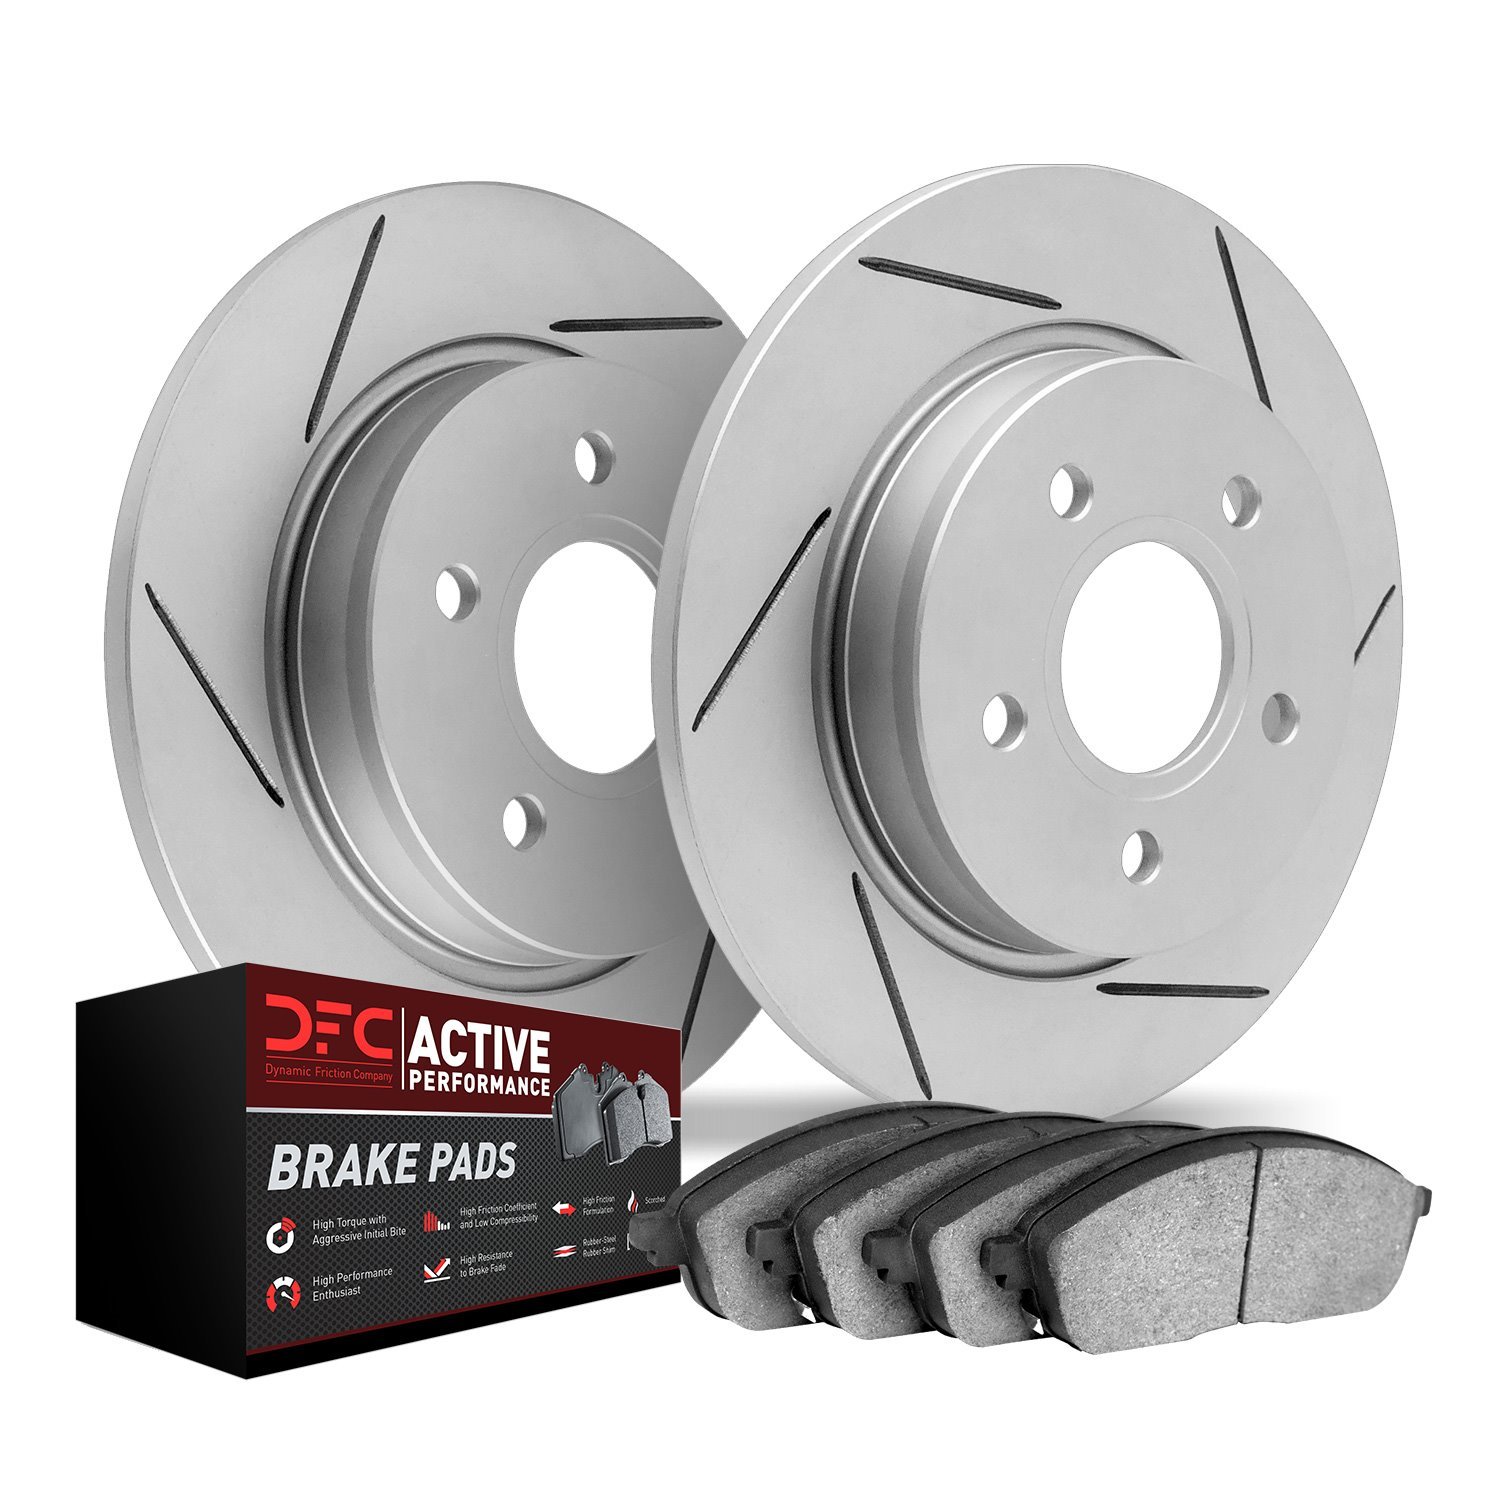 2702-63000 Geoperformance Slotted Brake Rotors with Active Performance Pads Kits, 1961-1991 Mercedes-Benz, Position: Rear